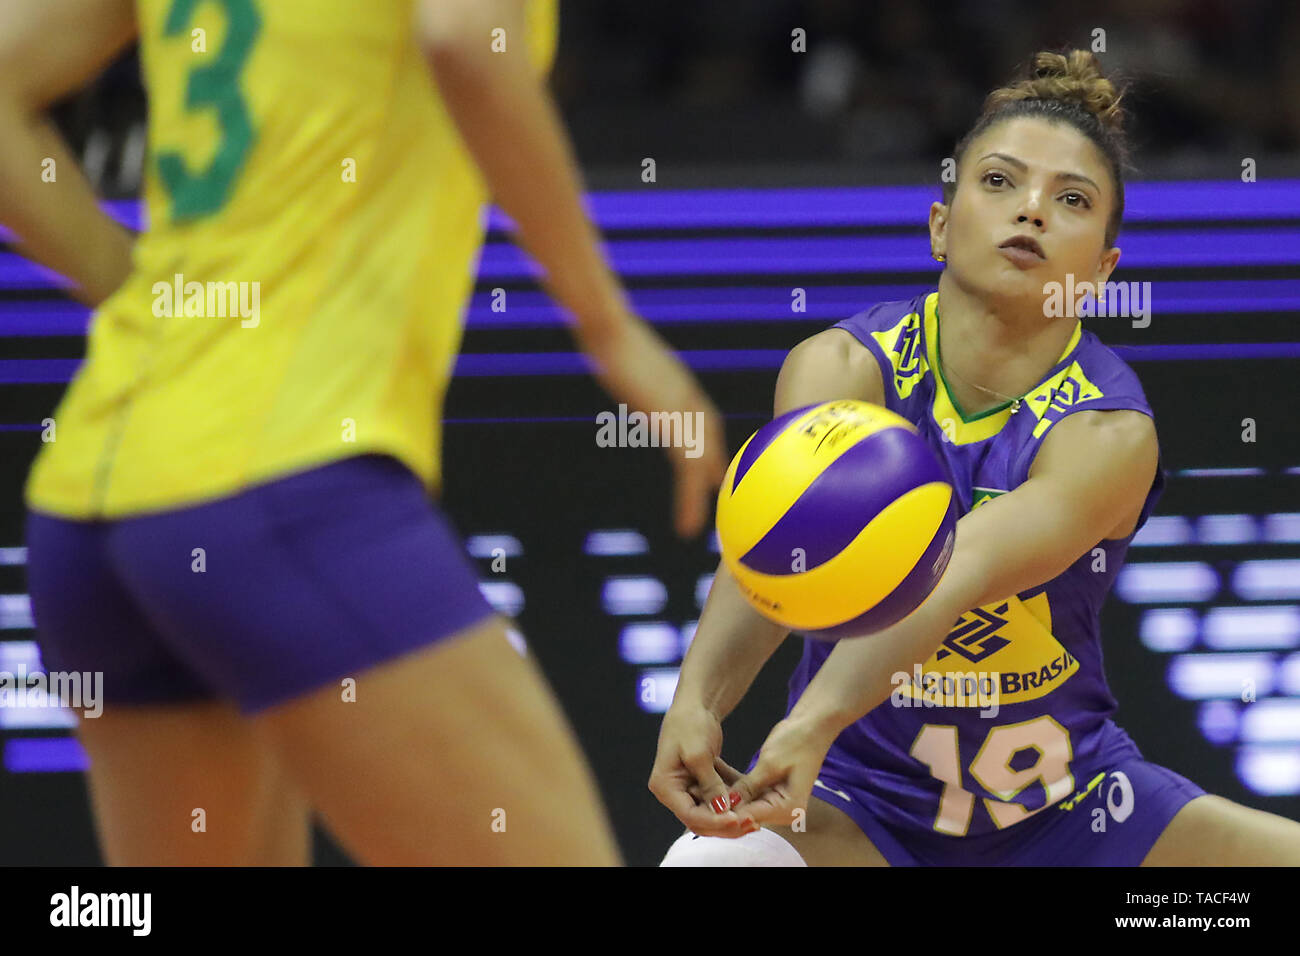 Brasilia, Brazil. 23rd May, 2019. Leia Henrique Da Silva Nicolosi (R) of Brazil competes during the 2019 FIVB Volleyball Nations League women's game between Brazil and Russia at the Nilson Nelson Gymnasium in Brasilia, Brazil, May 23, 2019. Brazil won 3-0. Credit: Lucio Tavora/Xinhua/Alamy Live News Stock Photo